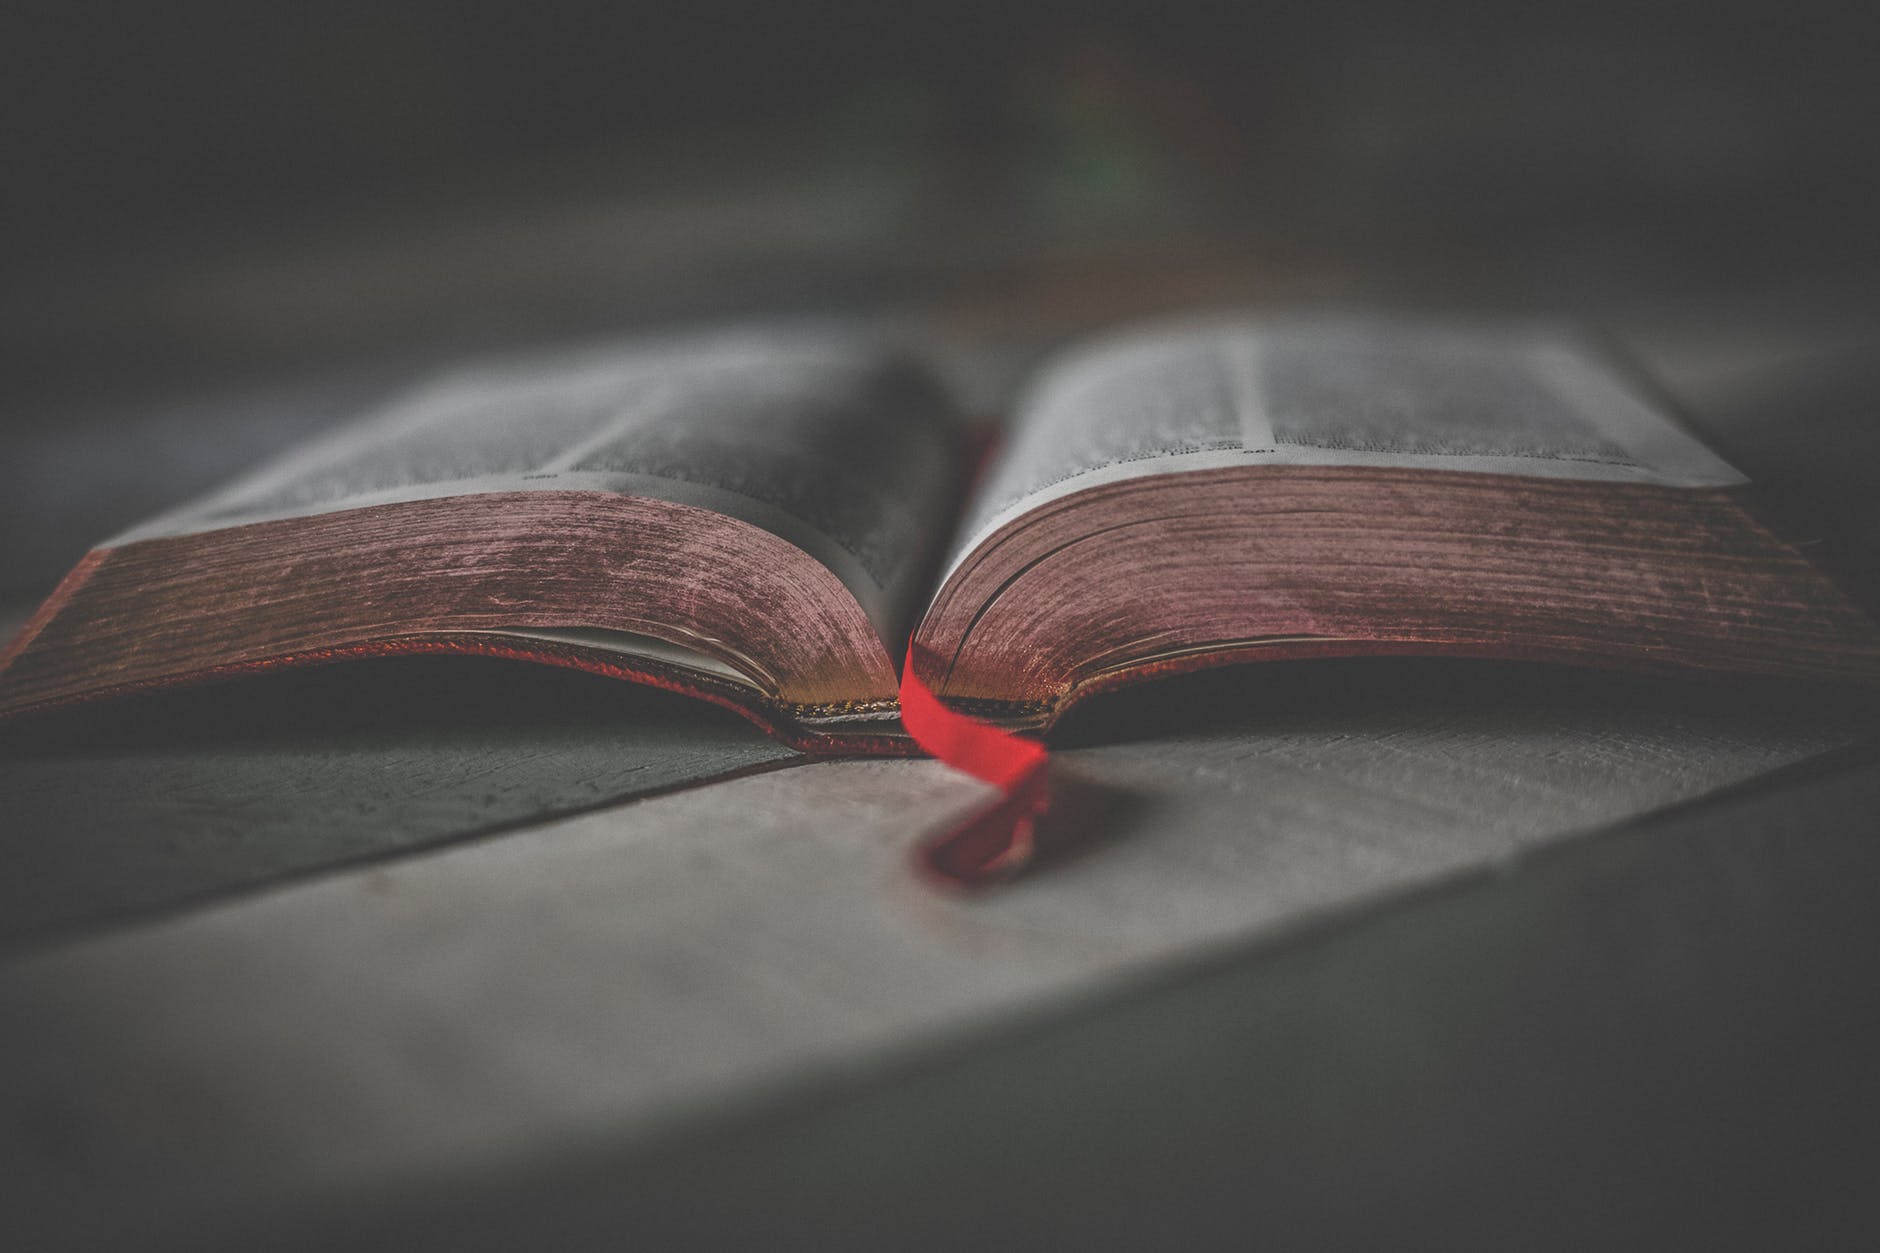 Is Reading Just Jesus’ Own Words And Ignoring Paul’s Teaching, The Gospel?